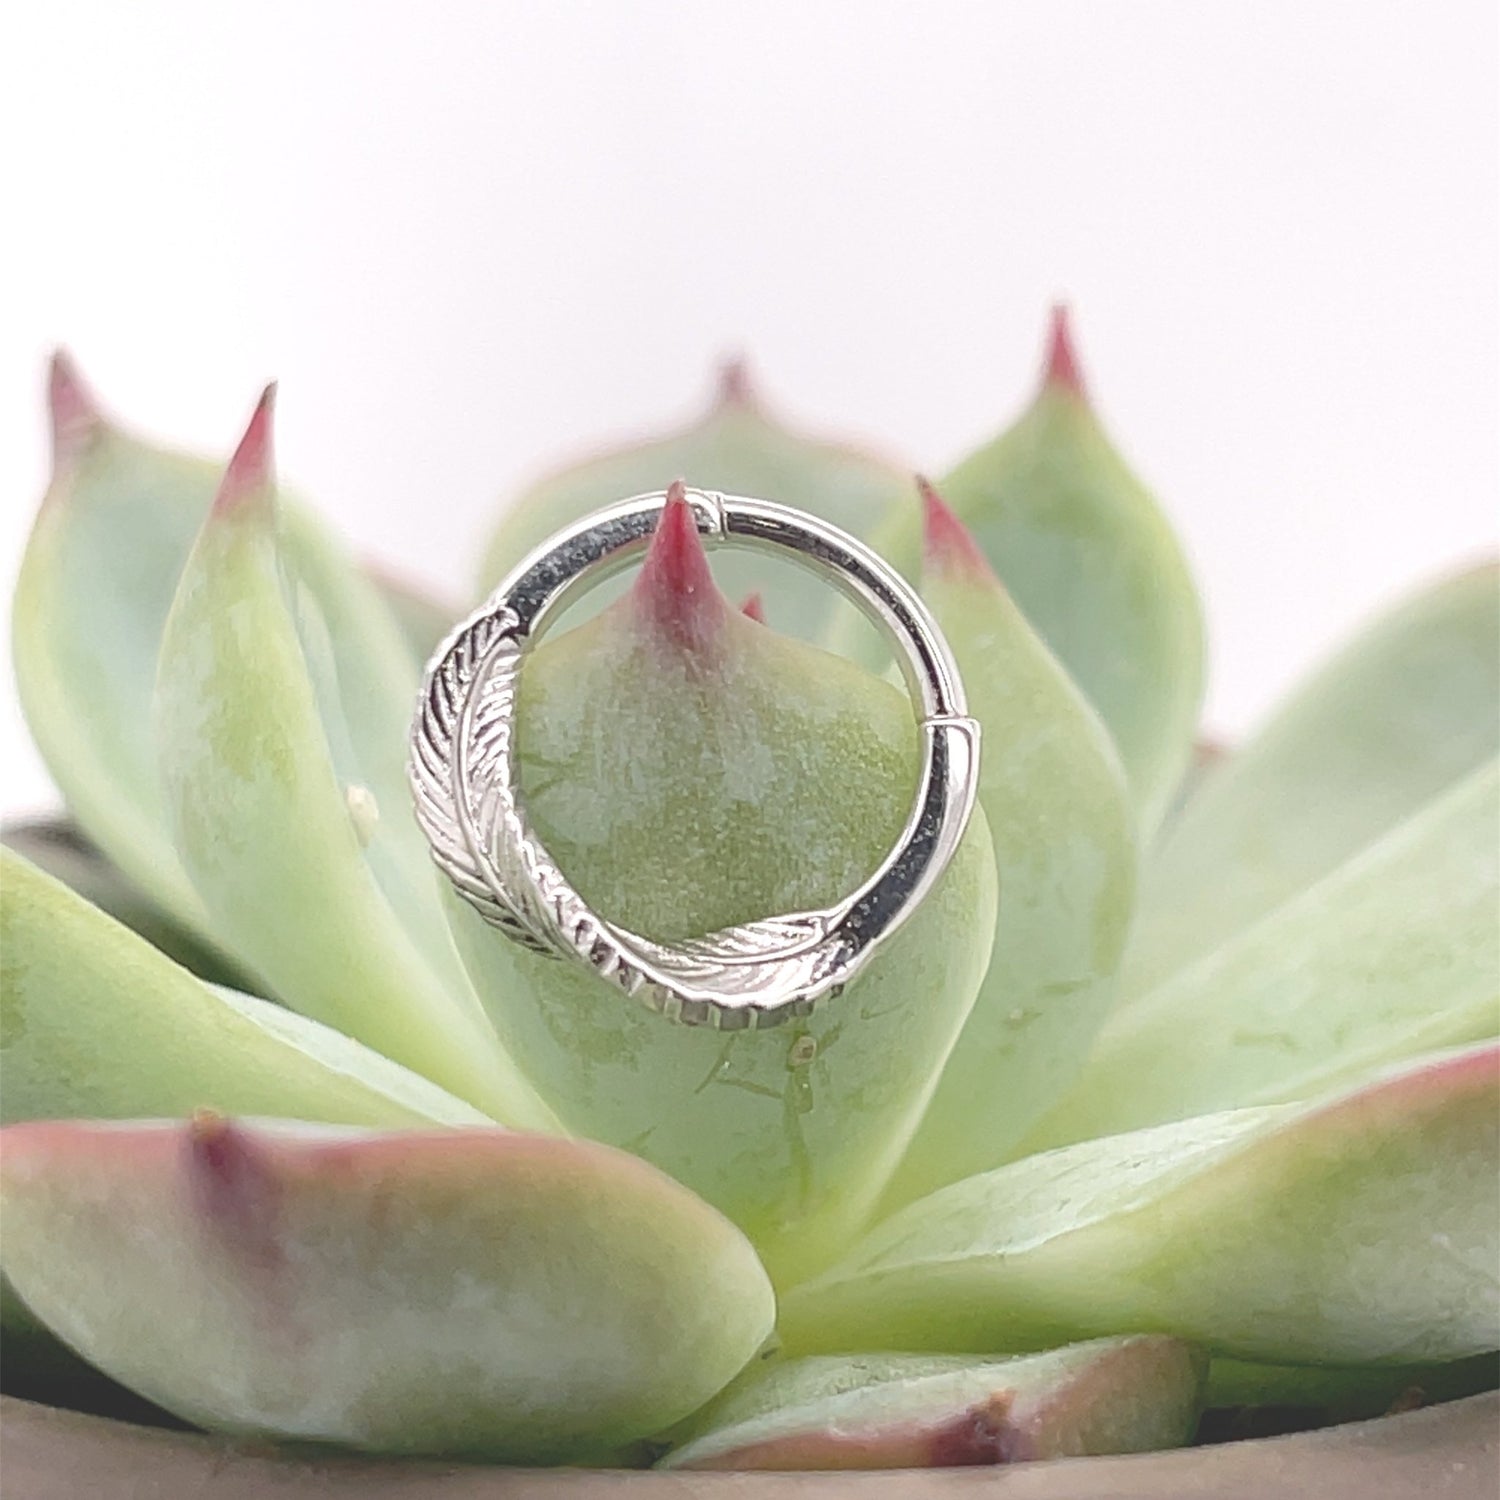 Twisting Feather Hinge Ring - Agave in Bloom